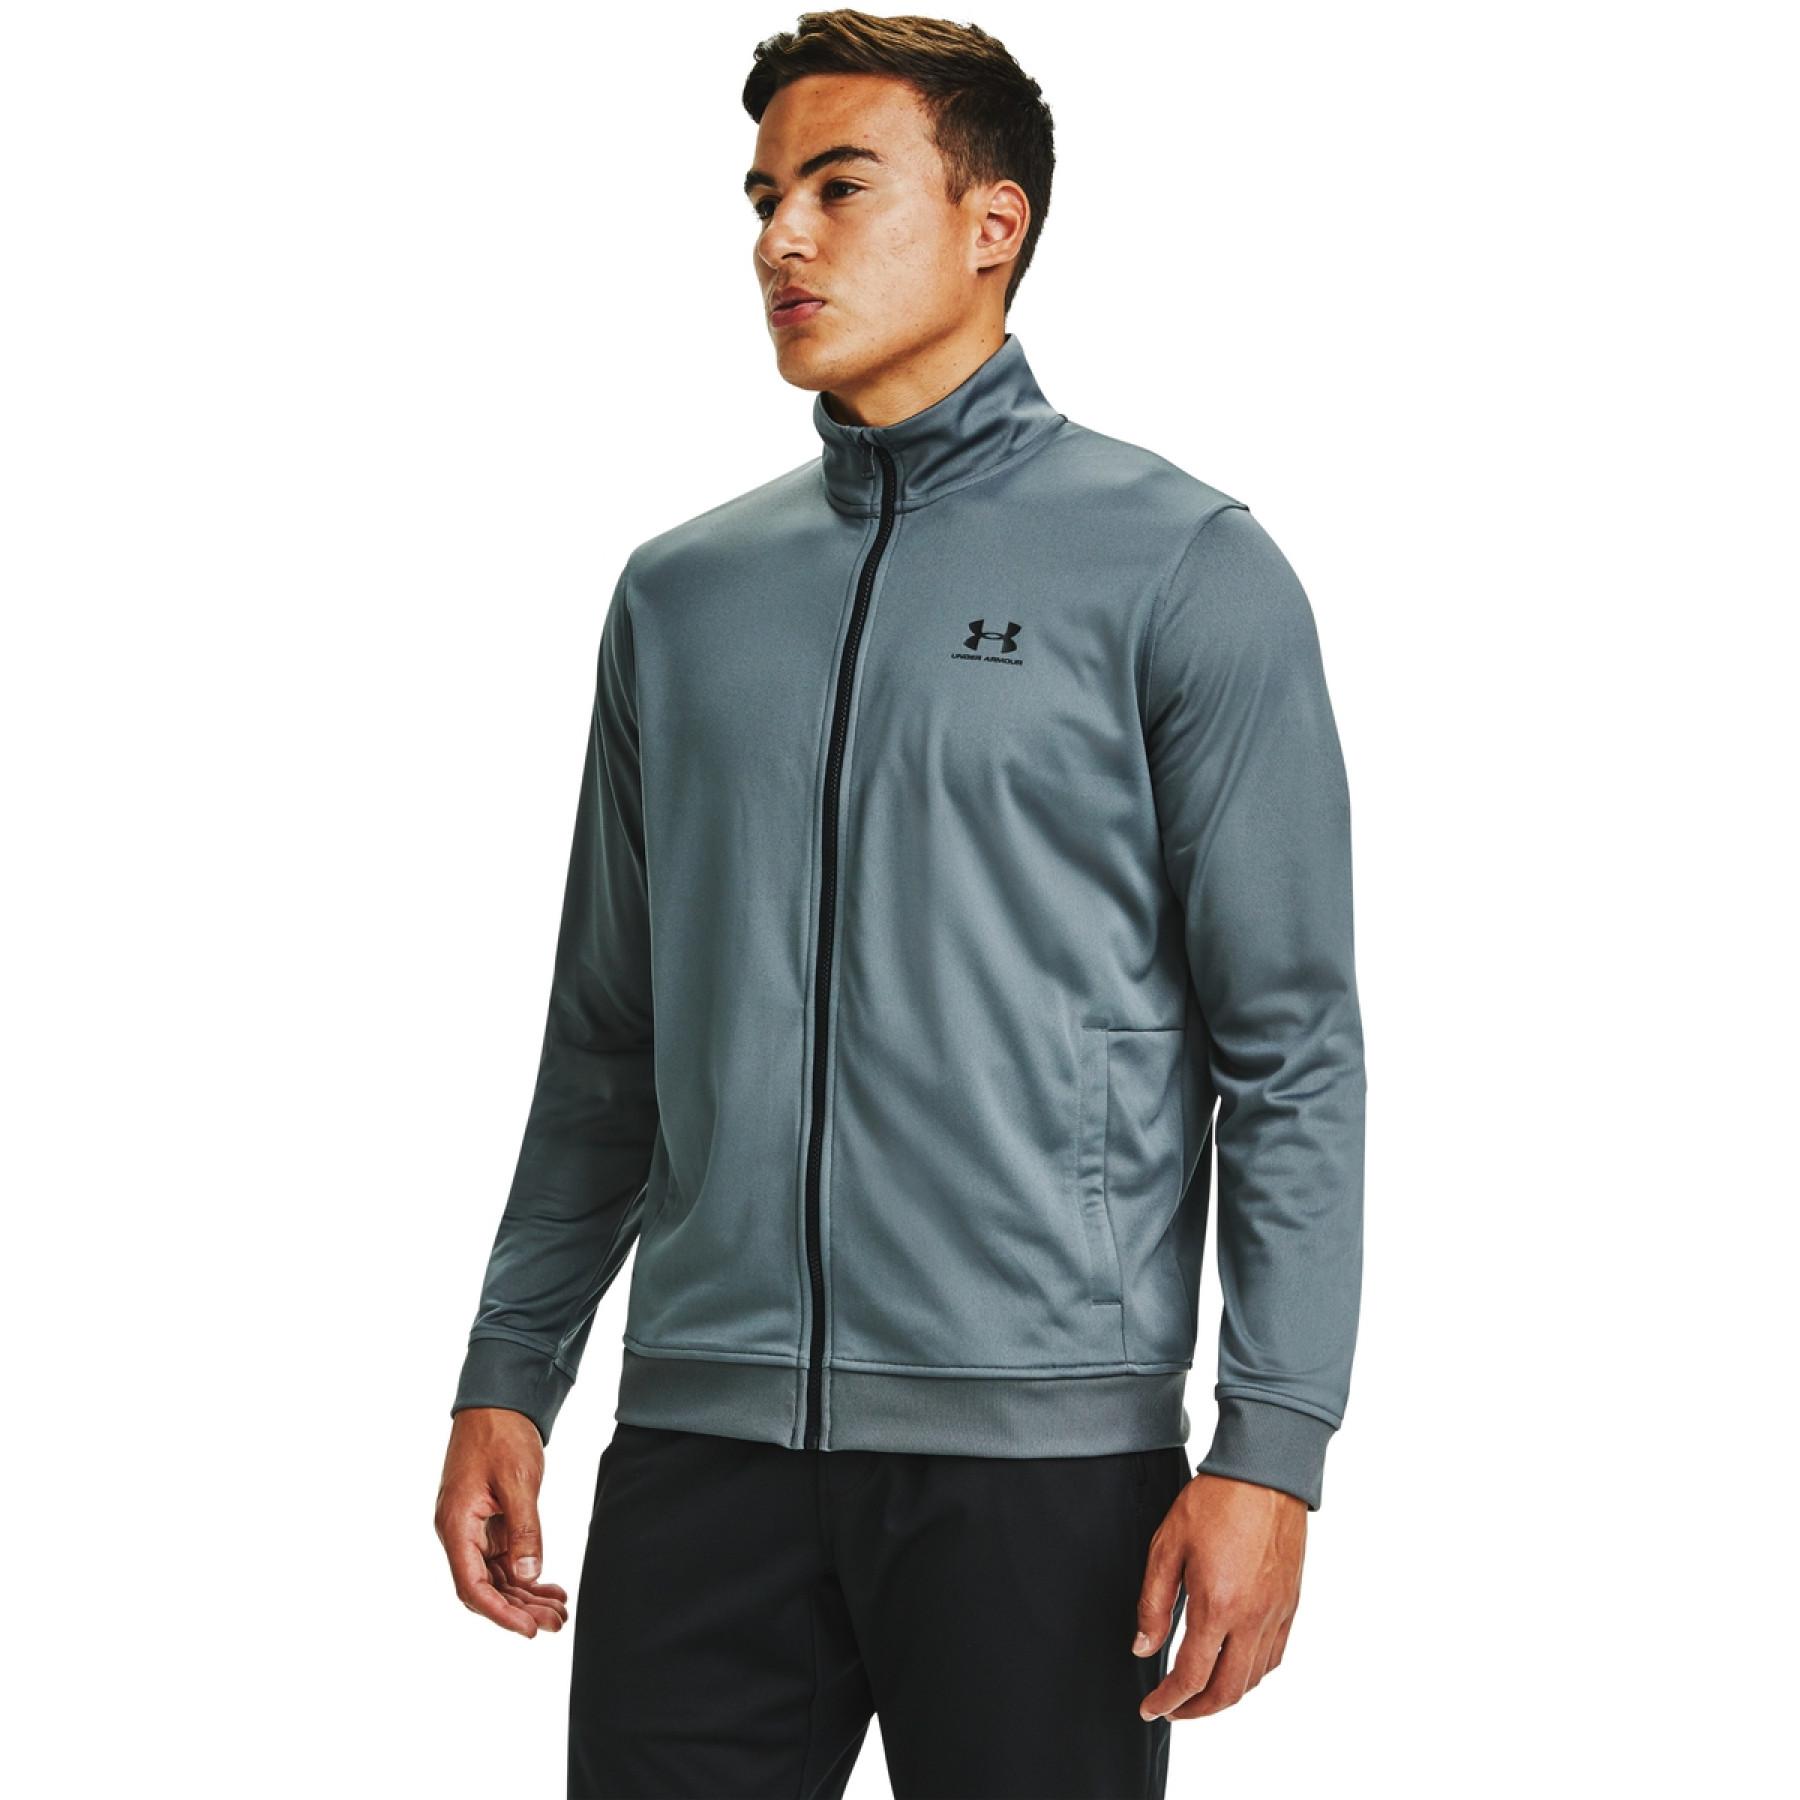 Jacket Under Armour Sportstyle Tricot